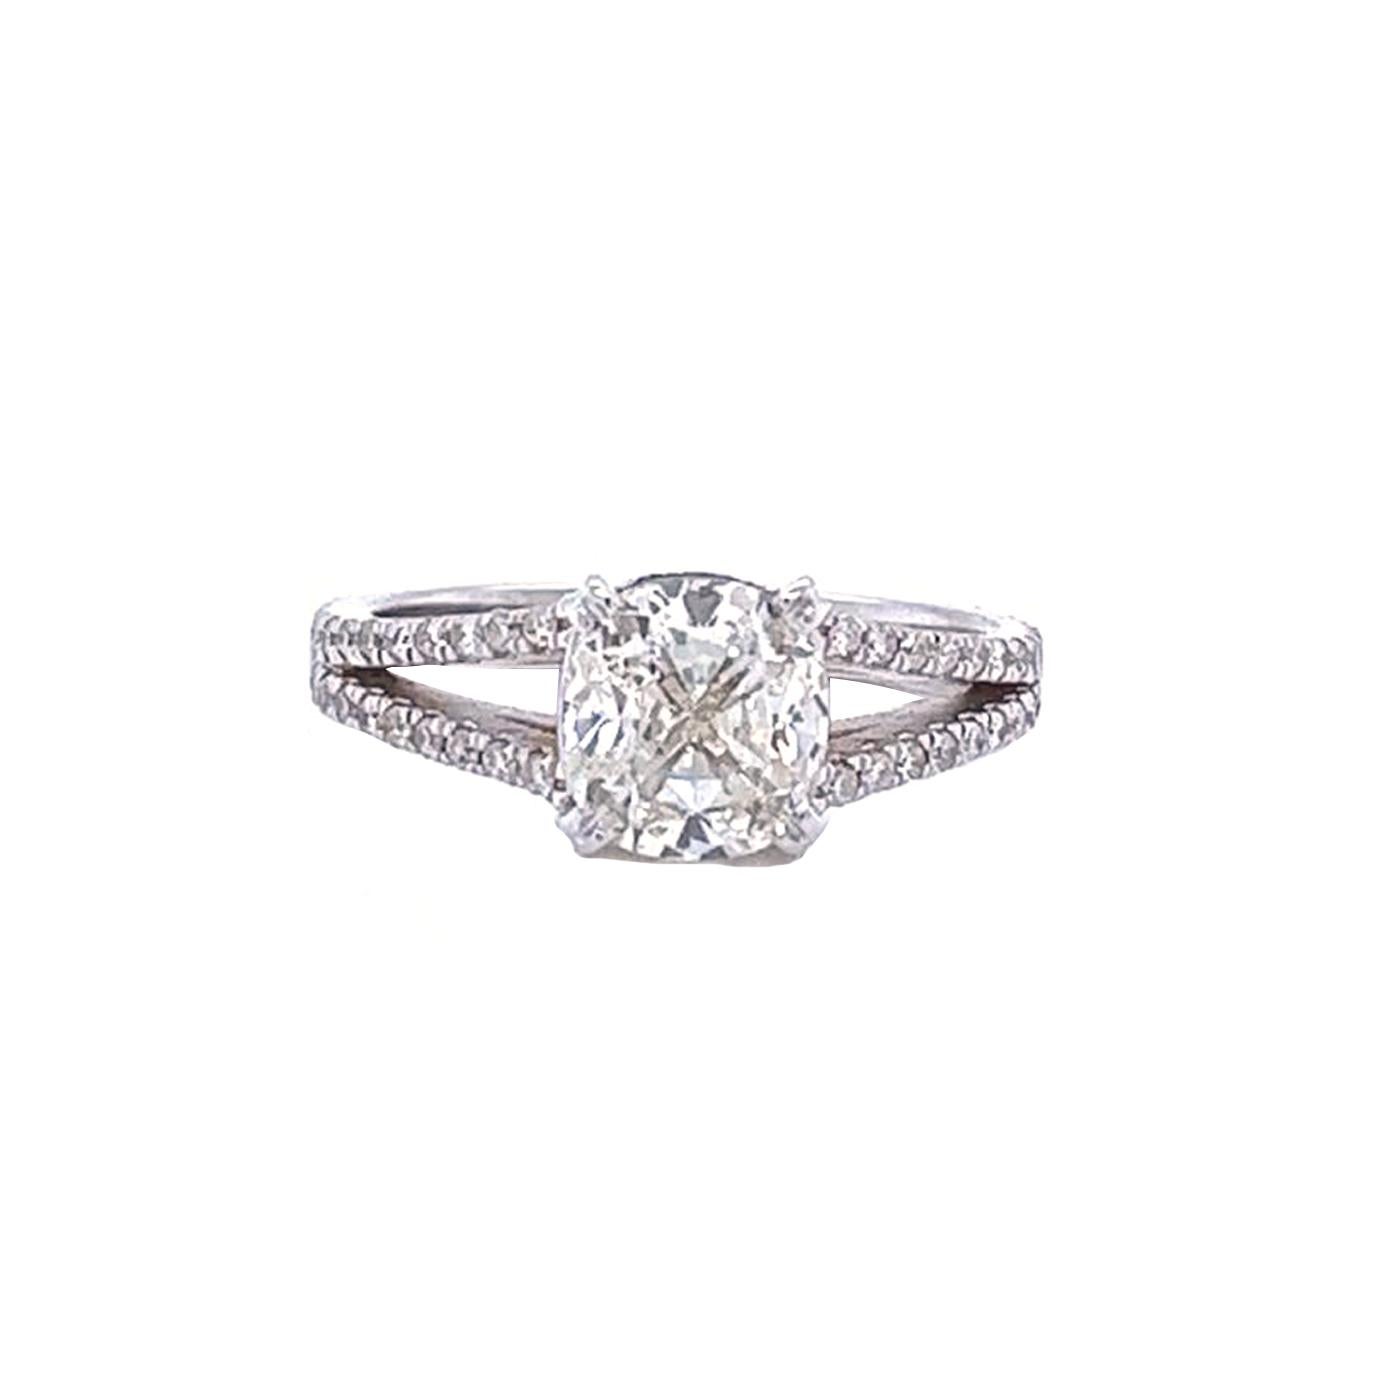 Cushion Cut Exceptional GIA Graded 2.02 Carat Cushion Diamond Ring Pave Set 14K White Gold For Sale